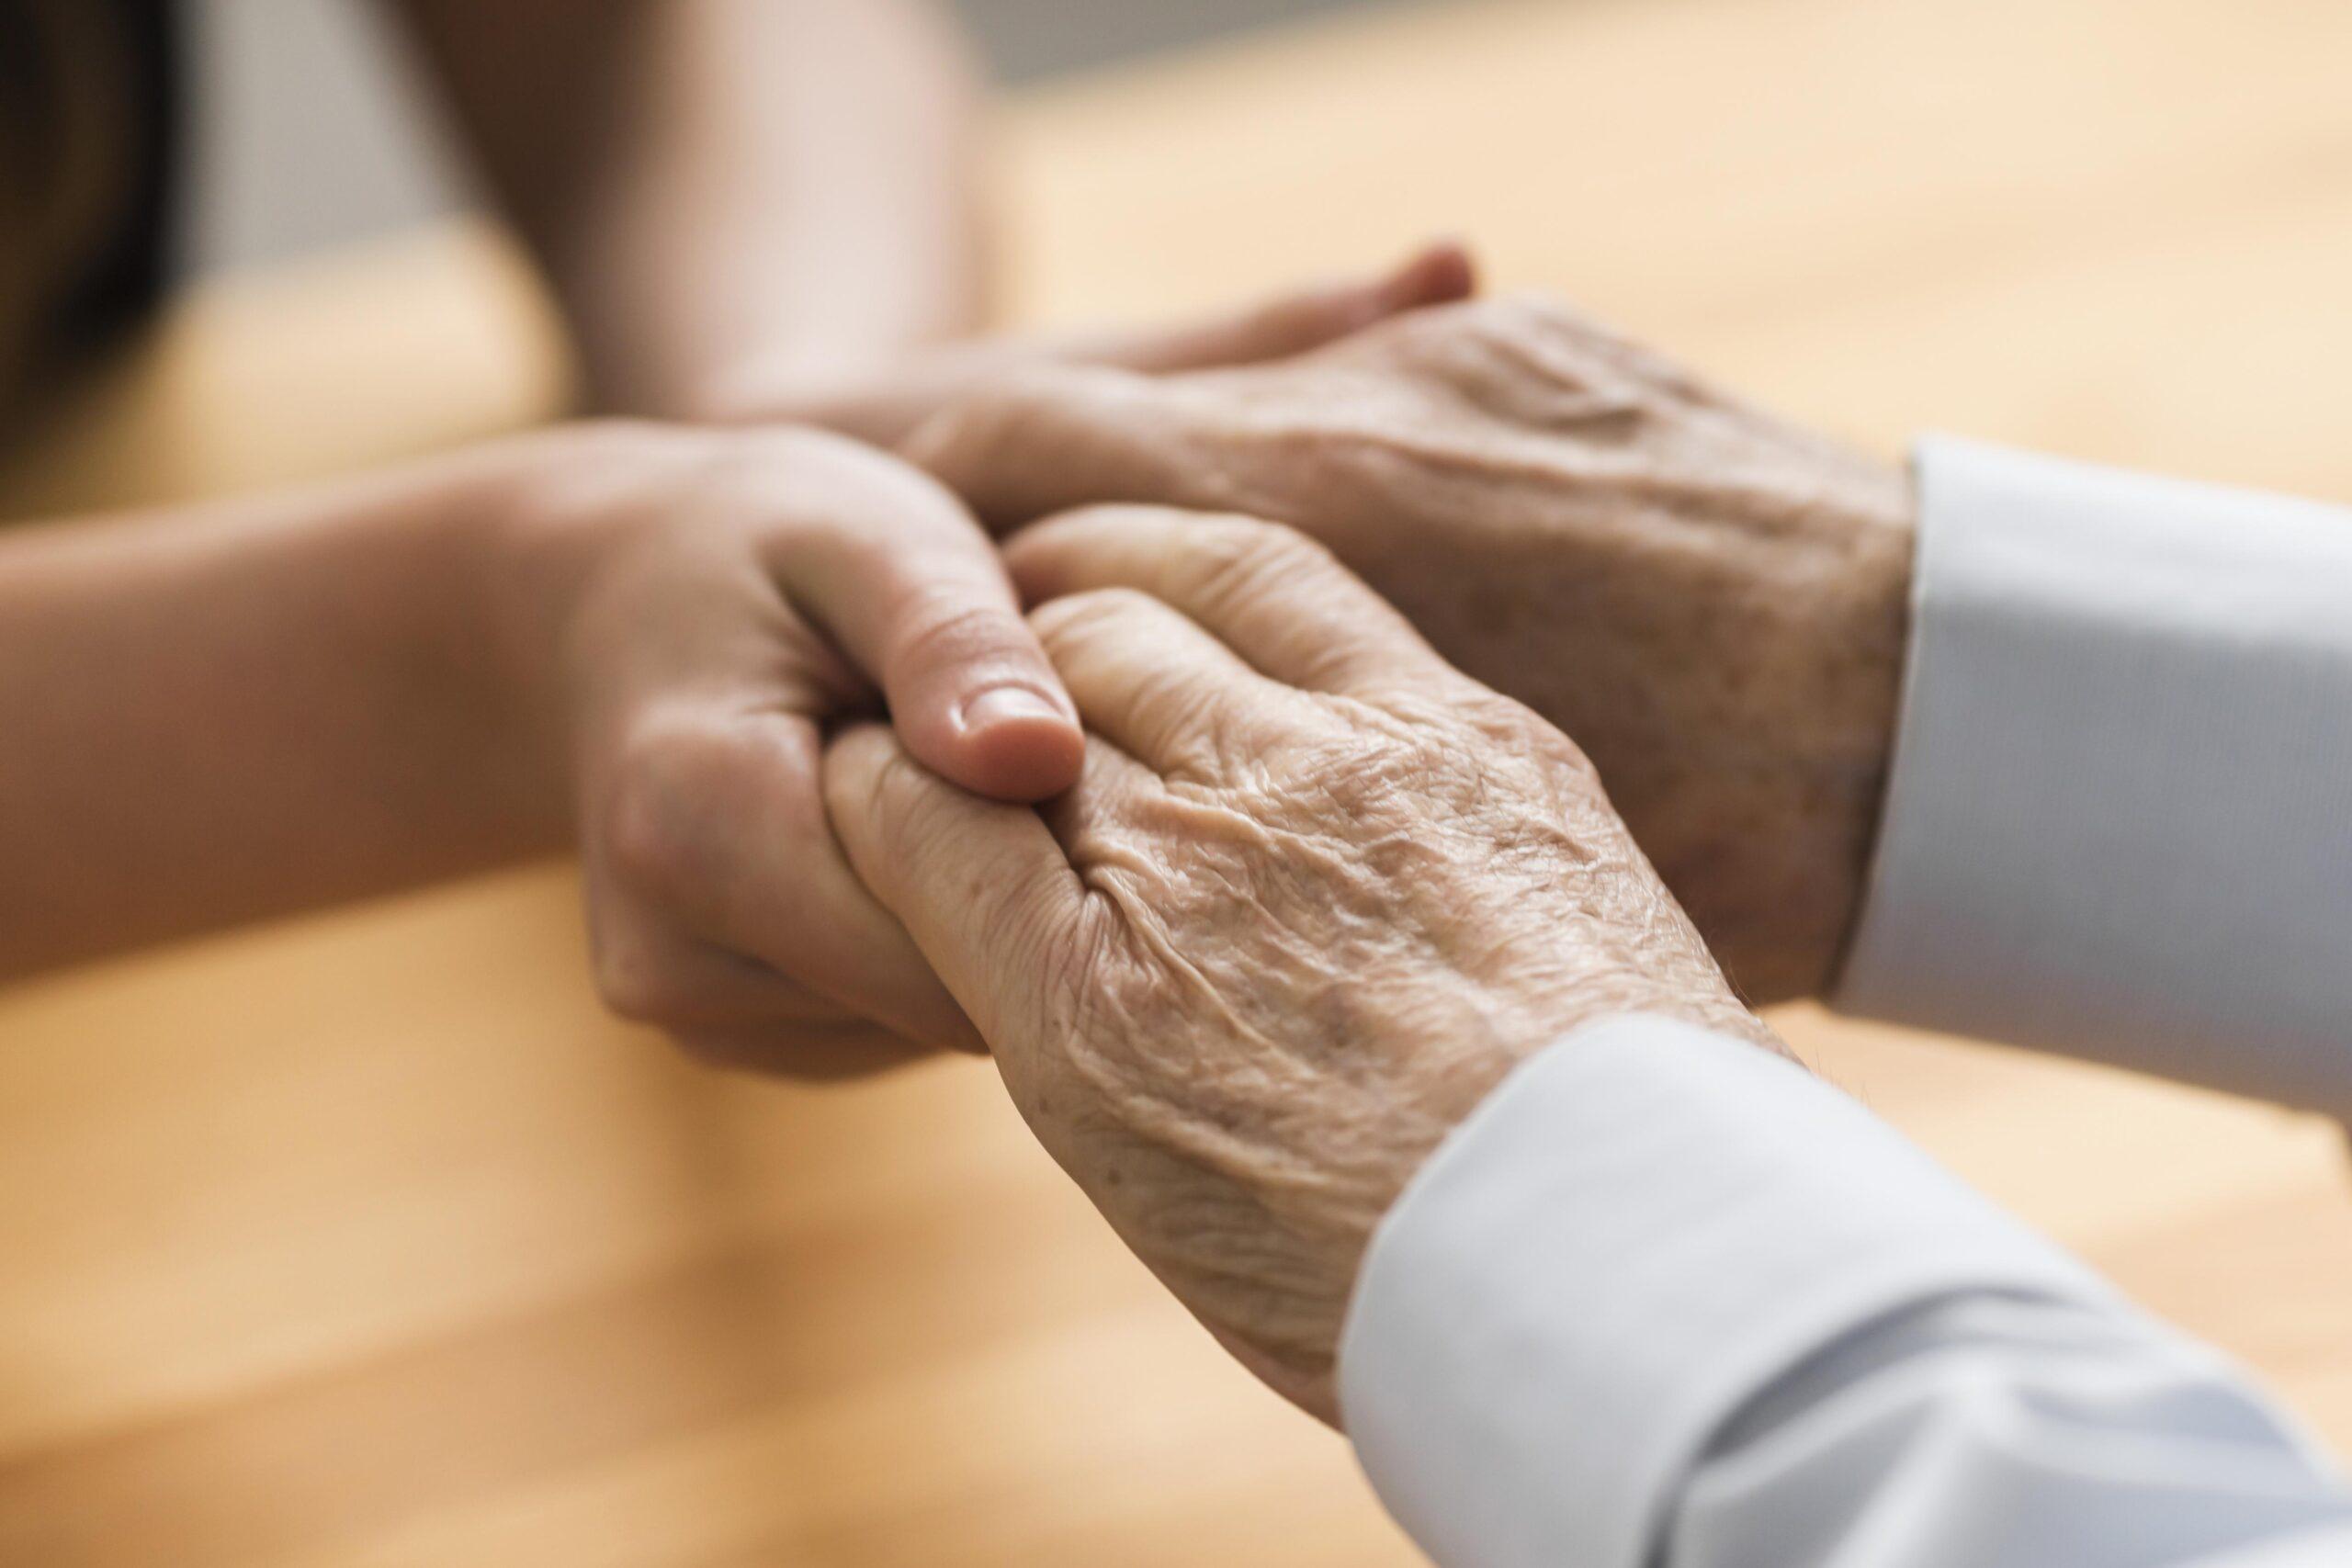 hospice training for changes in elimination holding hands